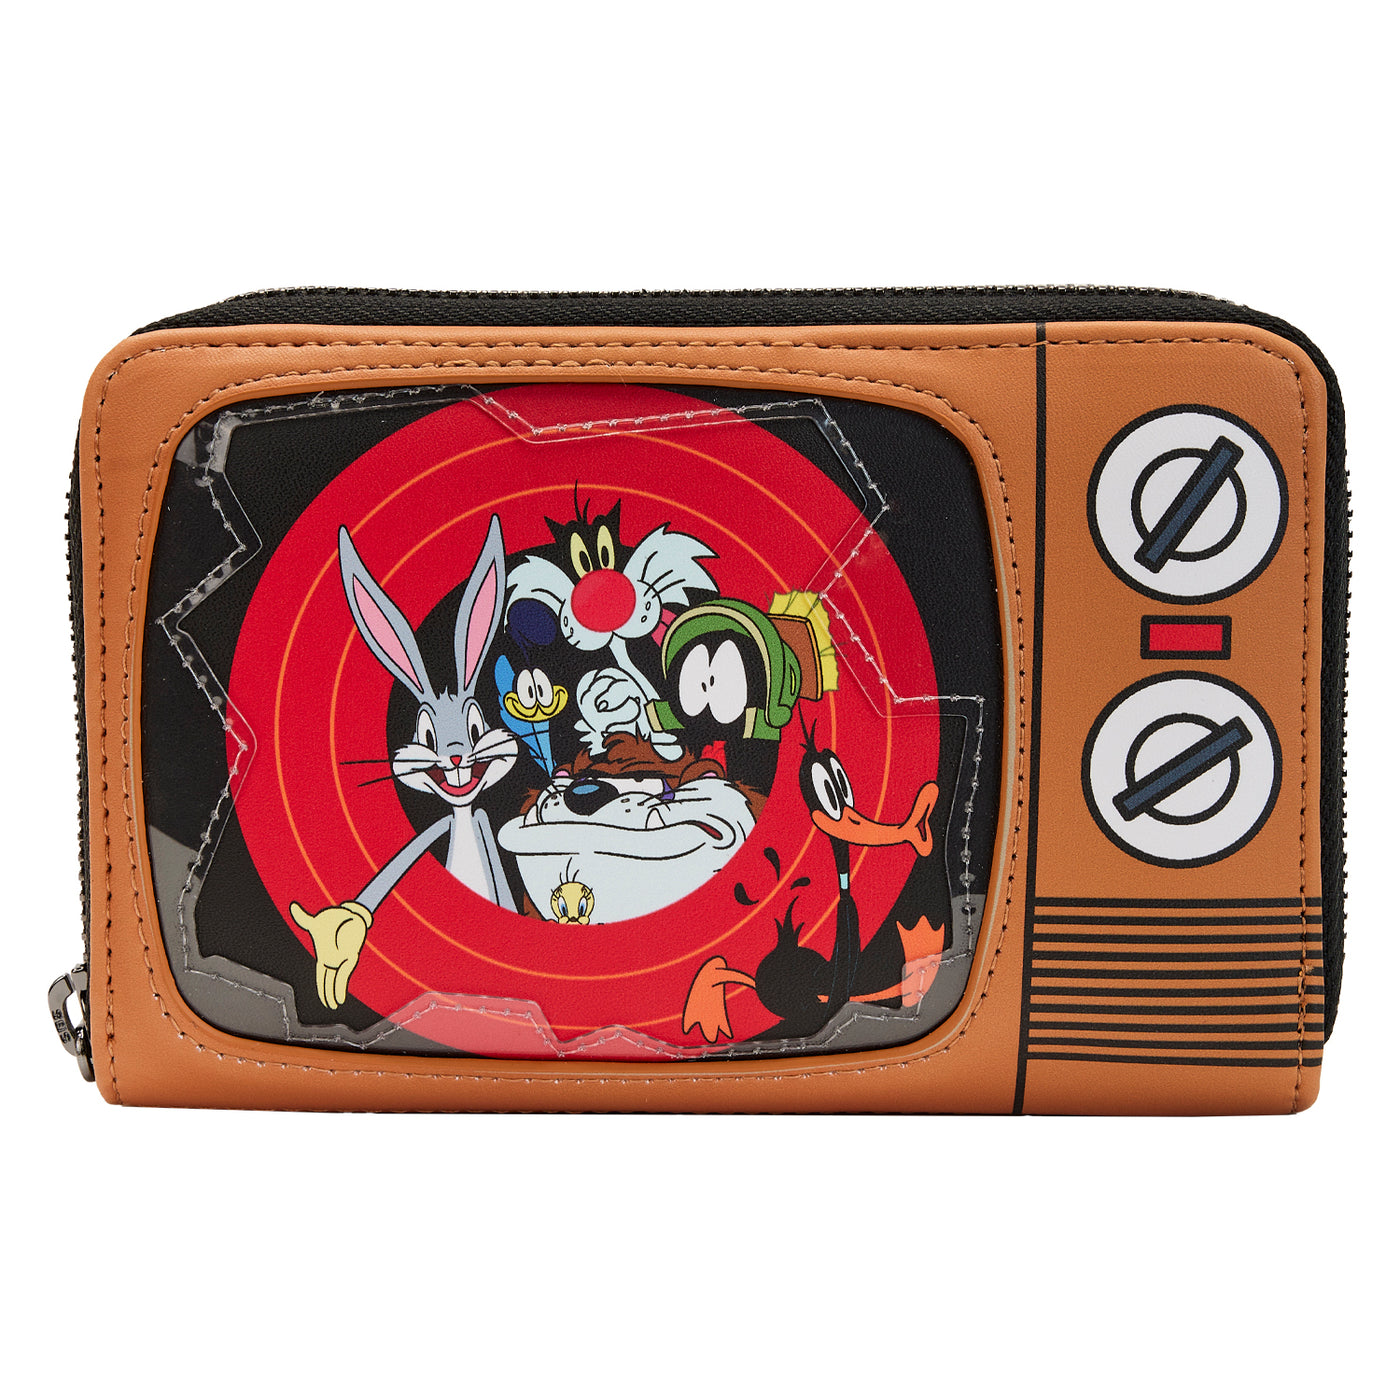 Looney Tunes That's All Folks Wallet